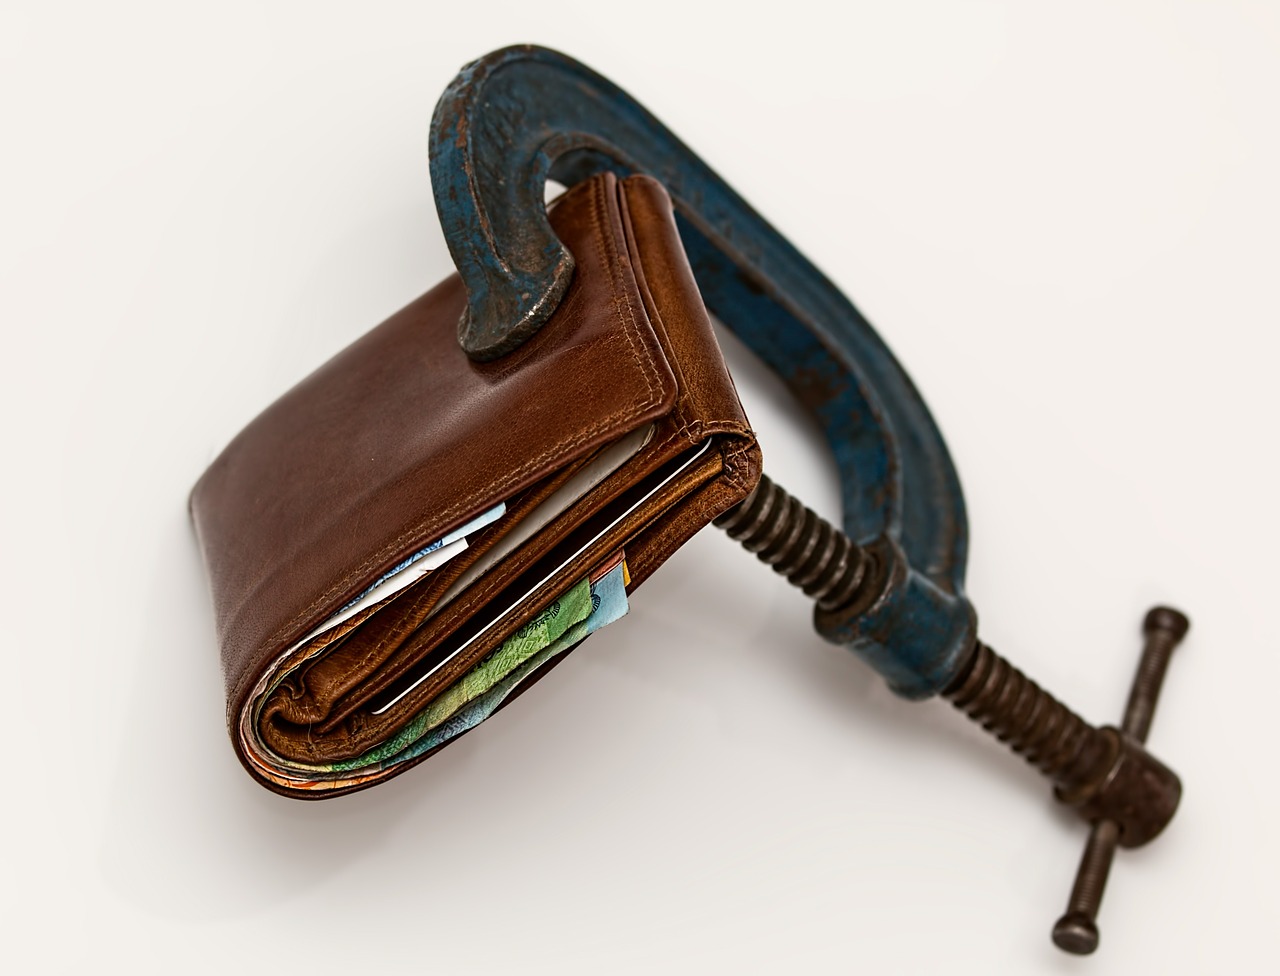 A wallet inside a tight clamp.